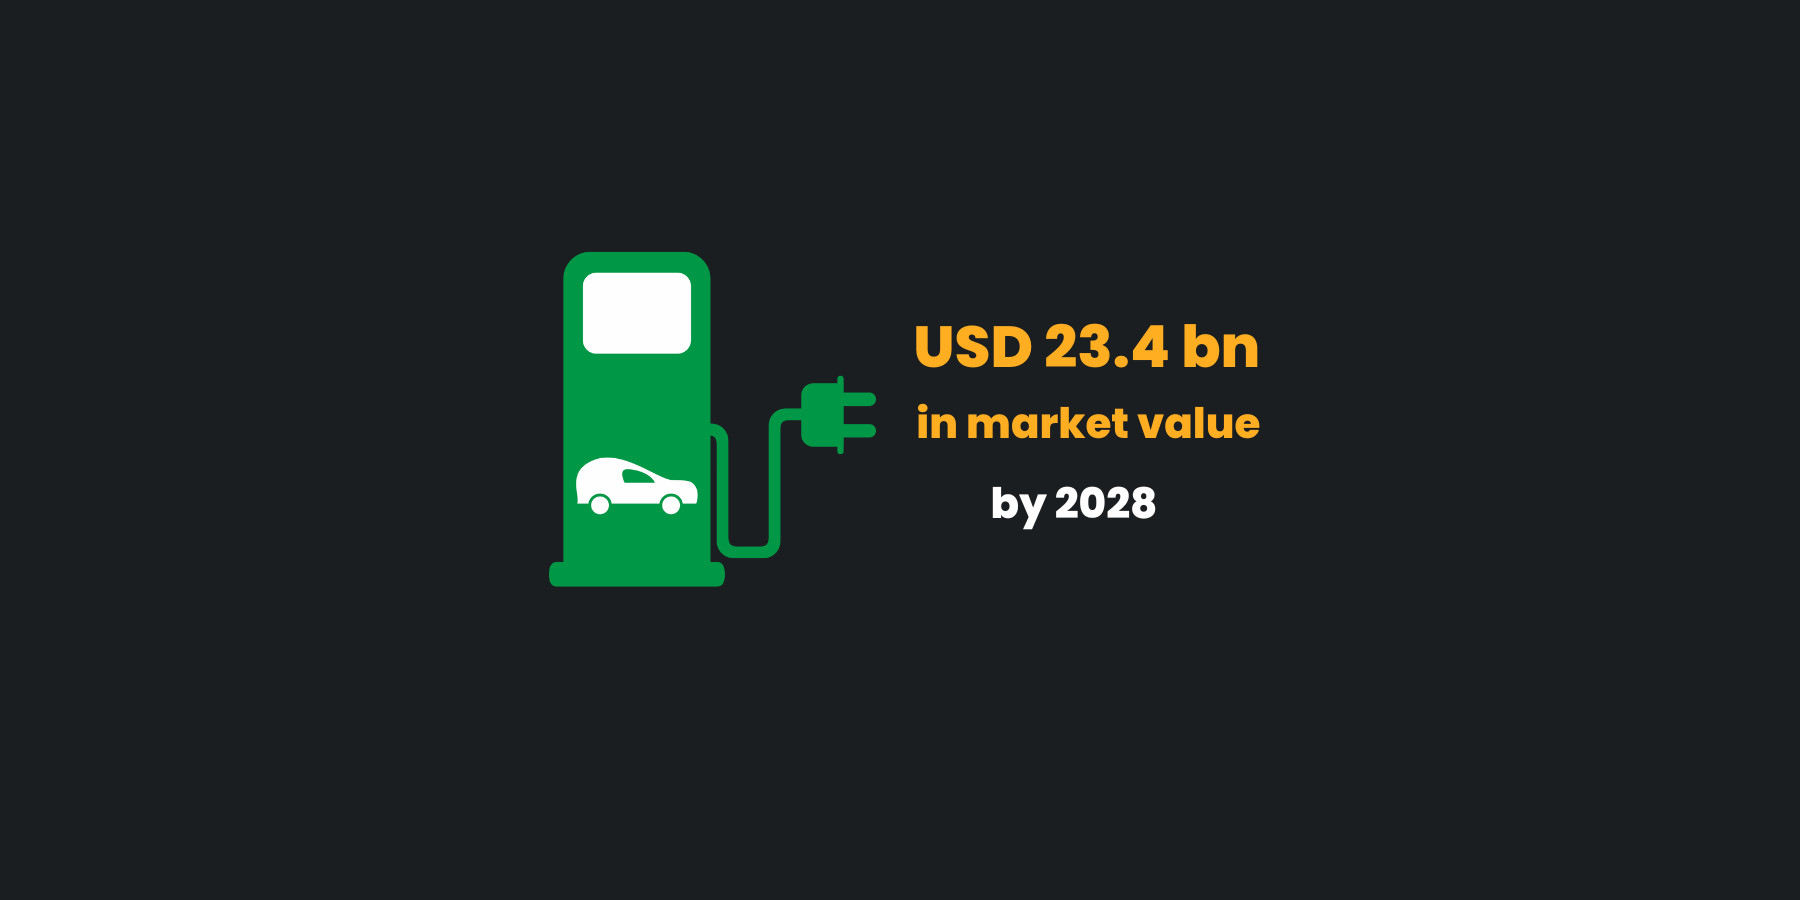 Global Electric Vehicle Charging Stations Market Will Reach USD 23.4bn